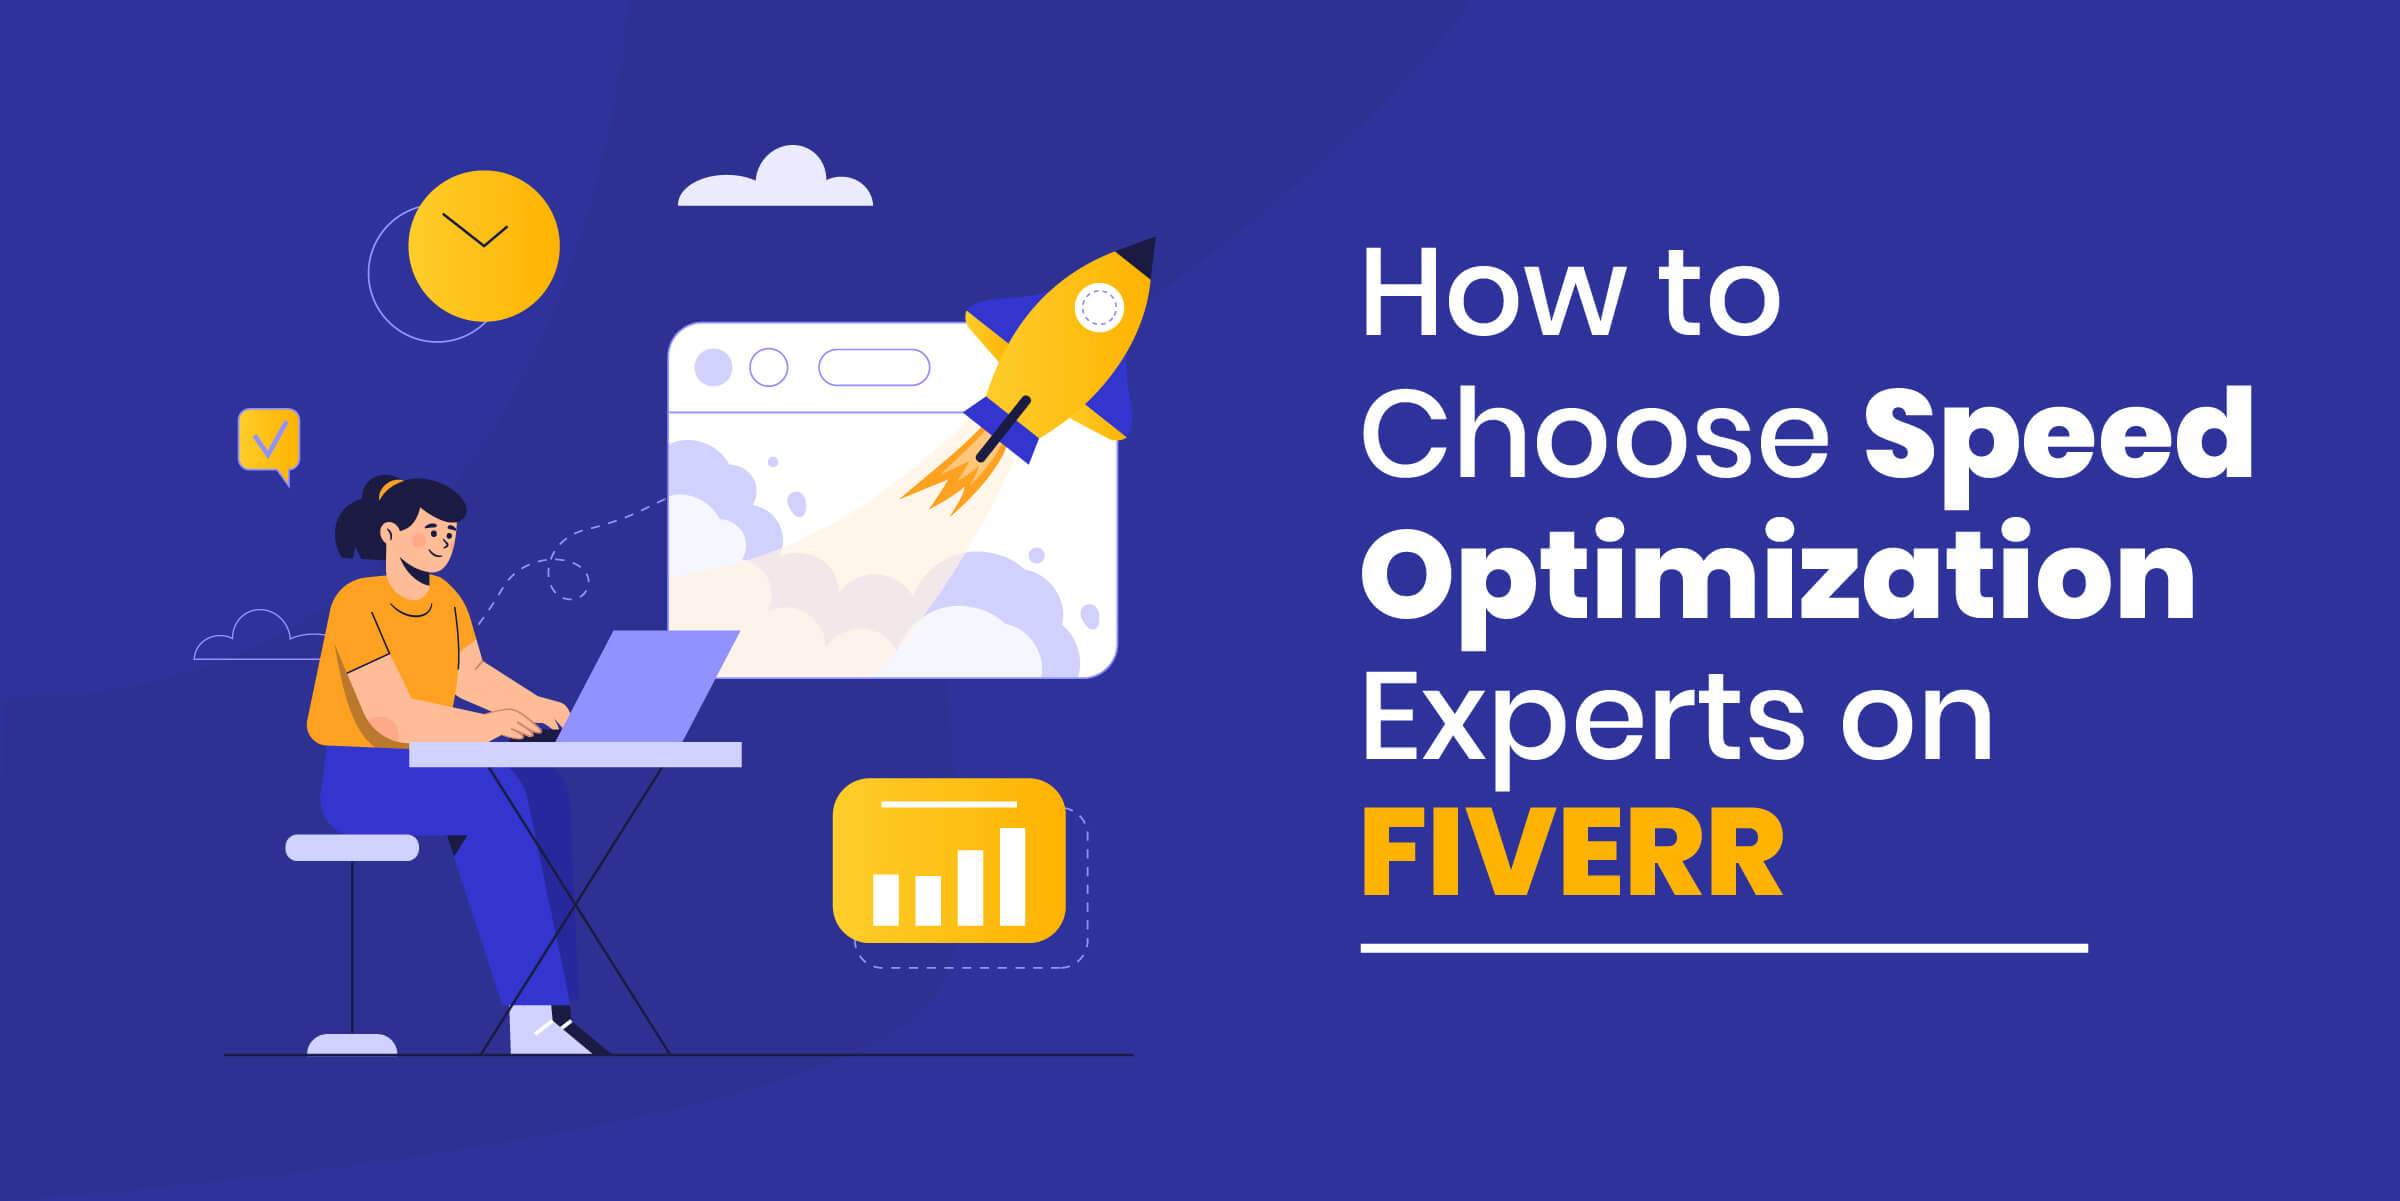 How to Choose Speed Optimization Experts